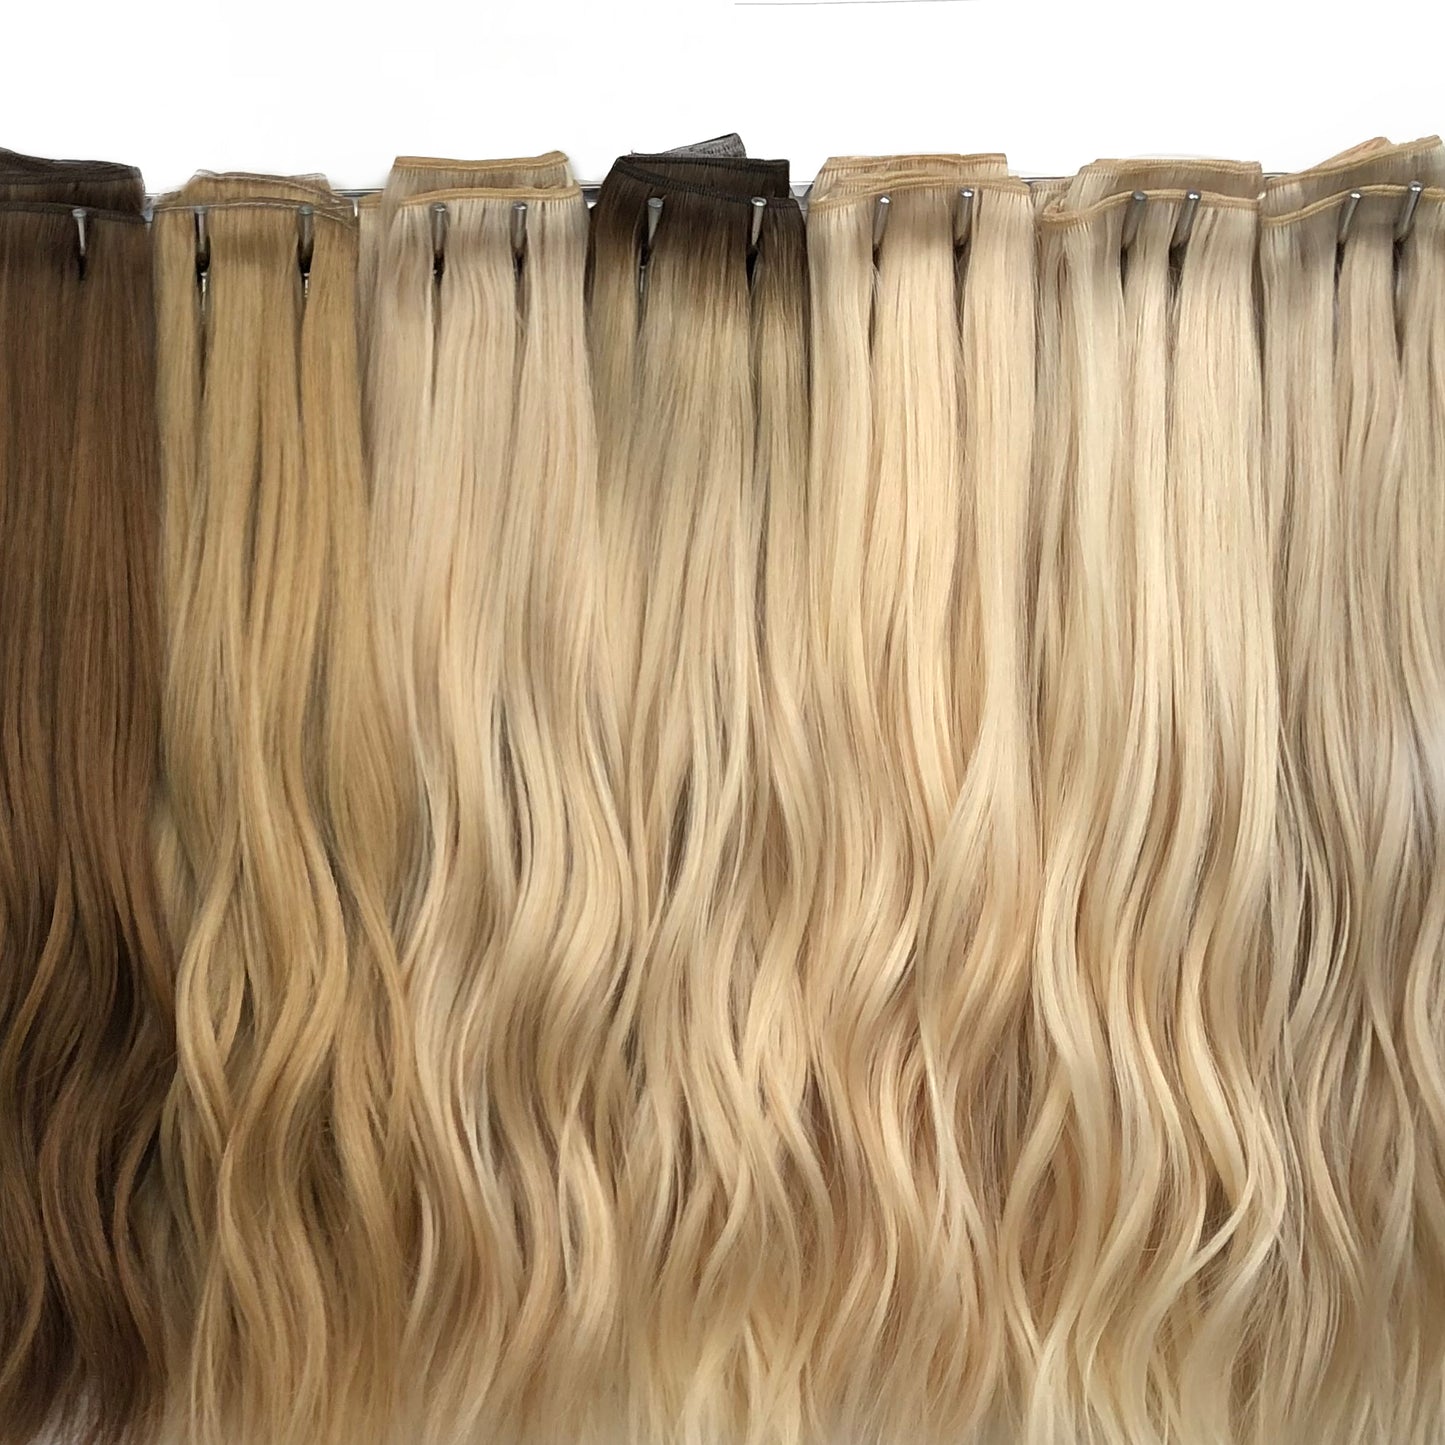 Extra Thick Clip-in Hair - Silky Straight 68g, 75g, 90g - Clip-ins - D-Lux - The Best Quality Remy Hair wefts, and shop the best quality remy hair Extensions at Your Hair Shop.